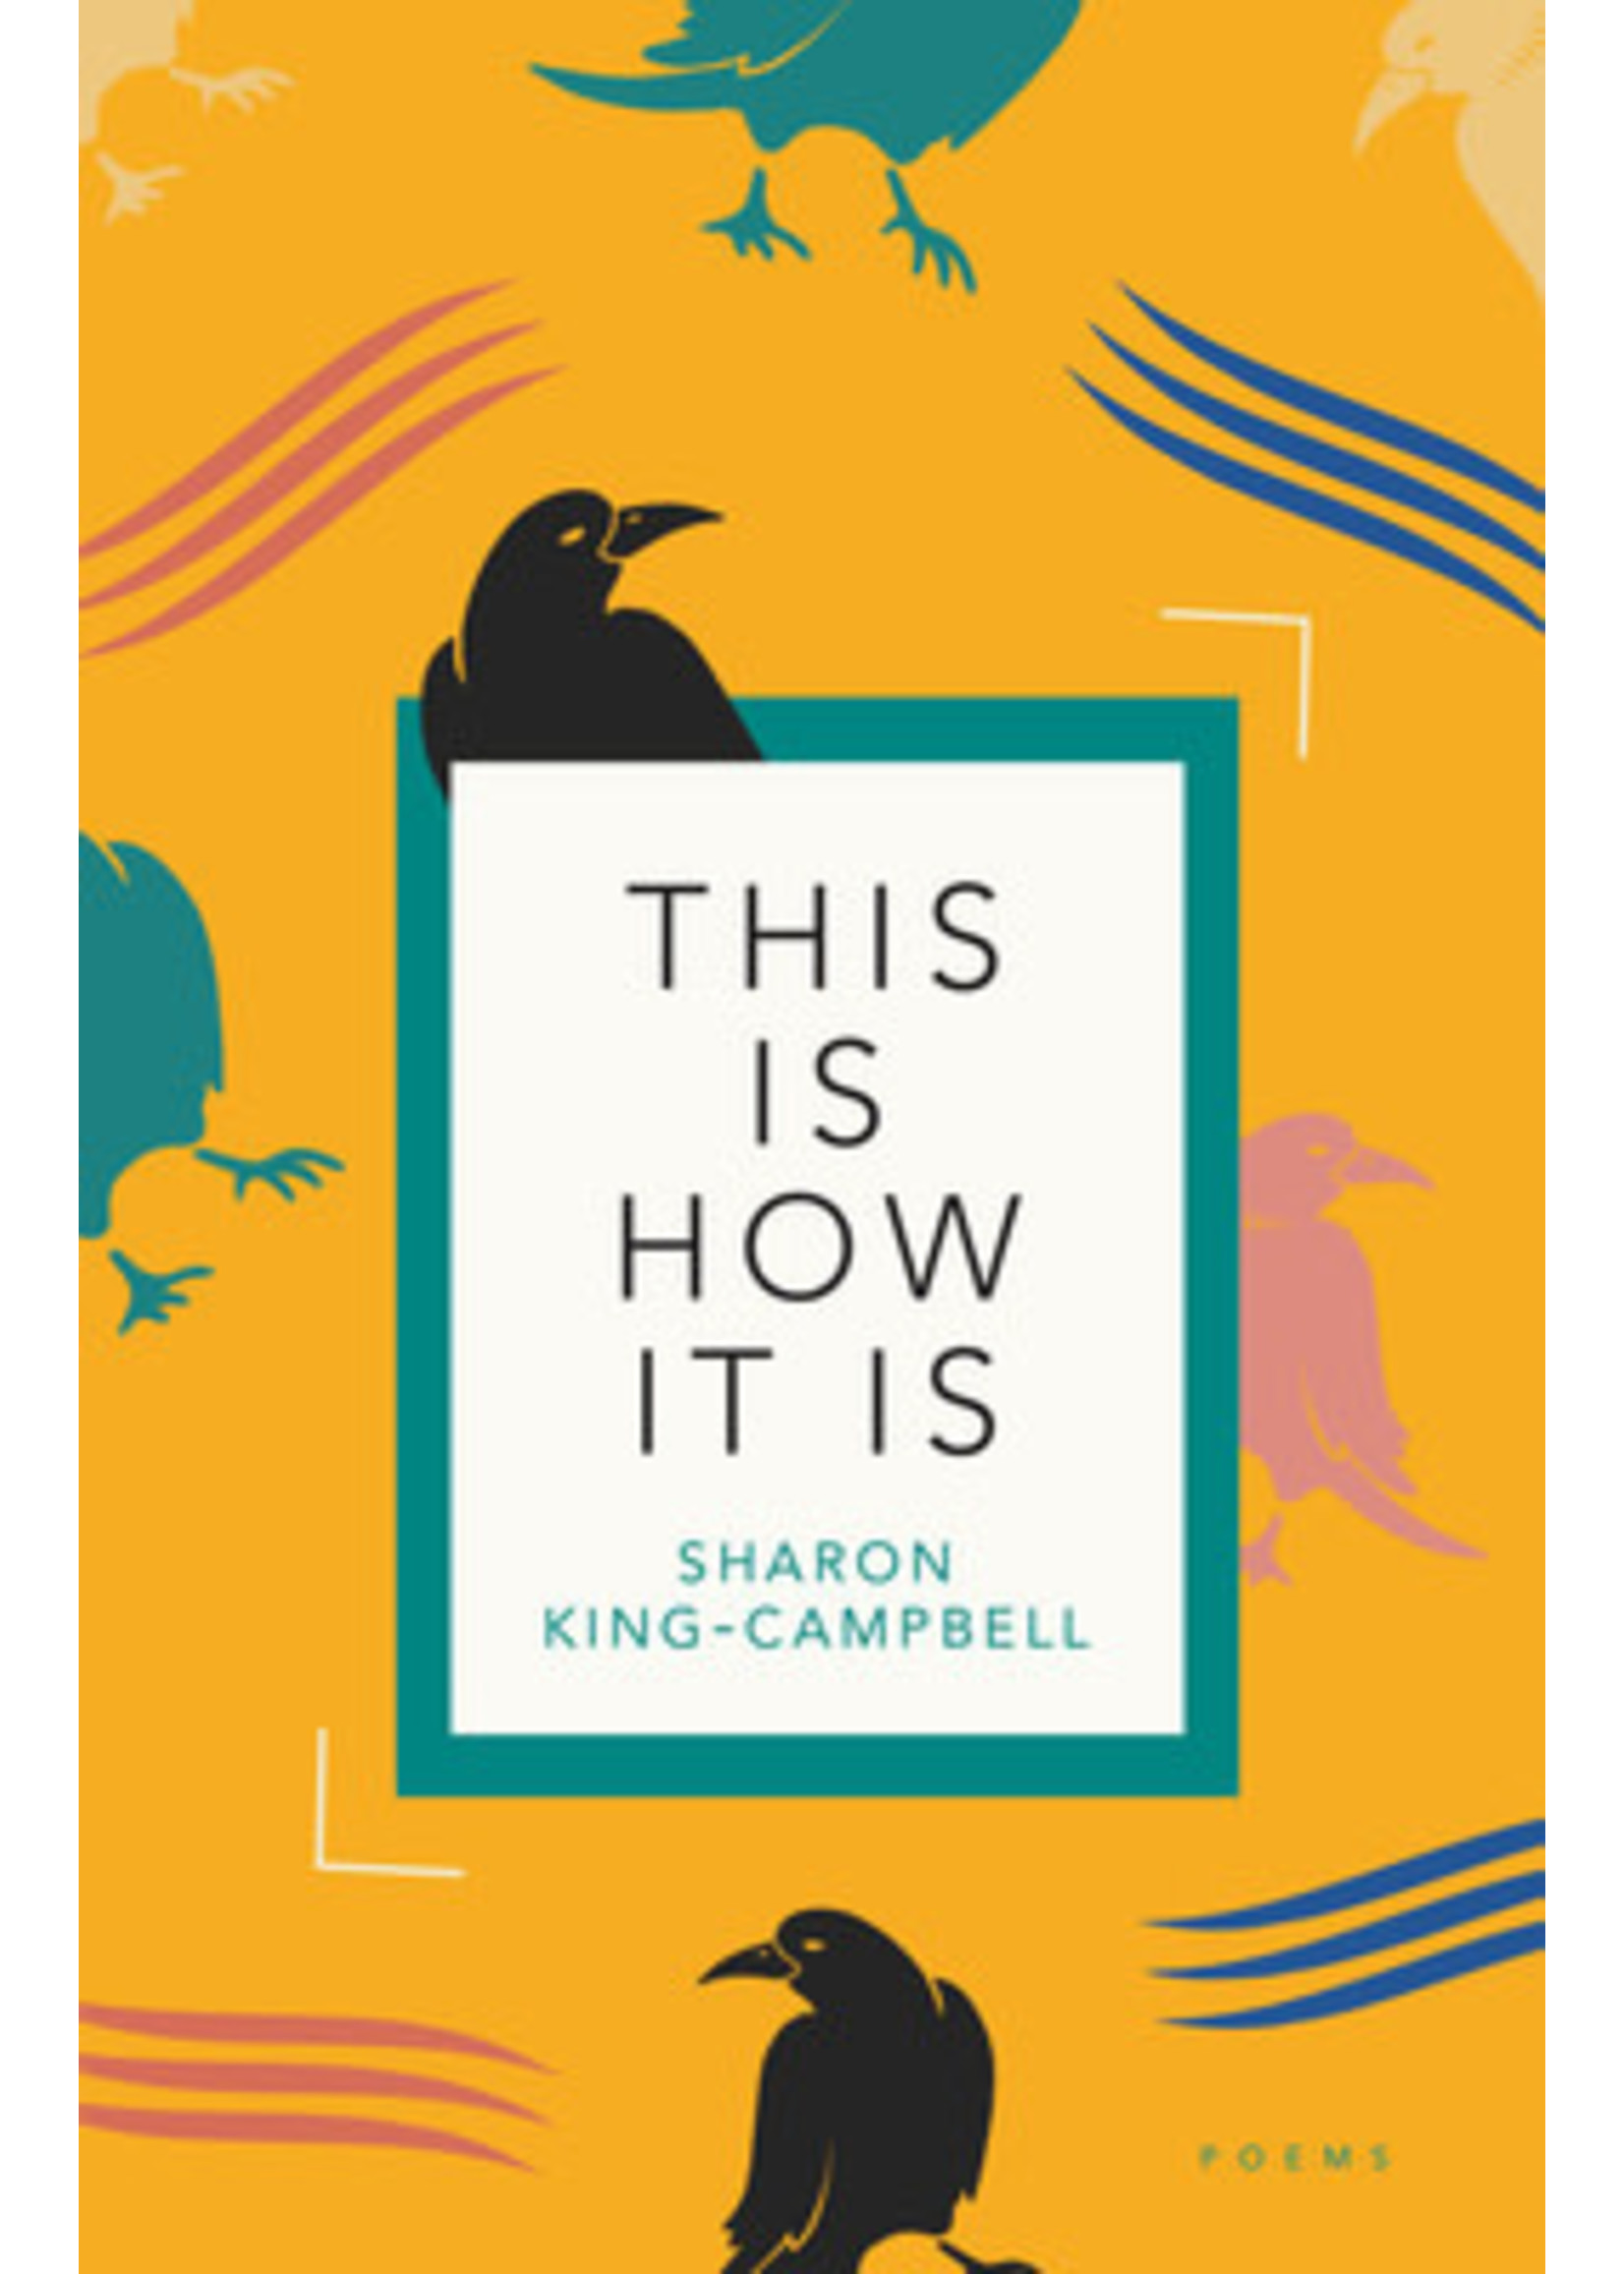 This Is How It Is by Sharon King-Campbell